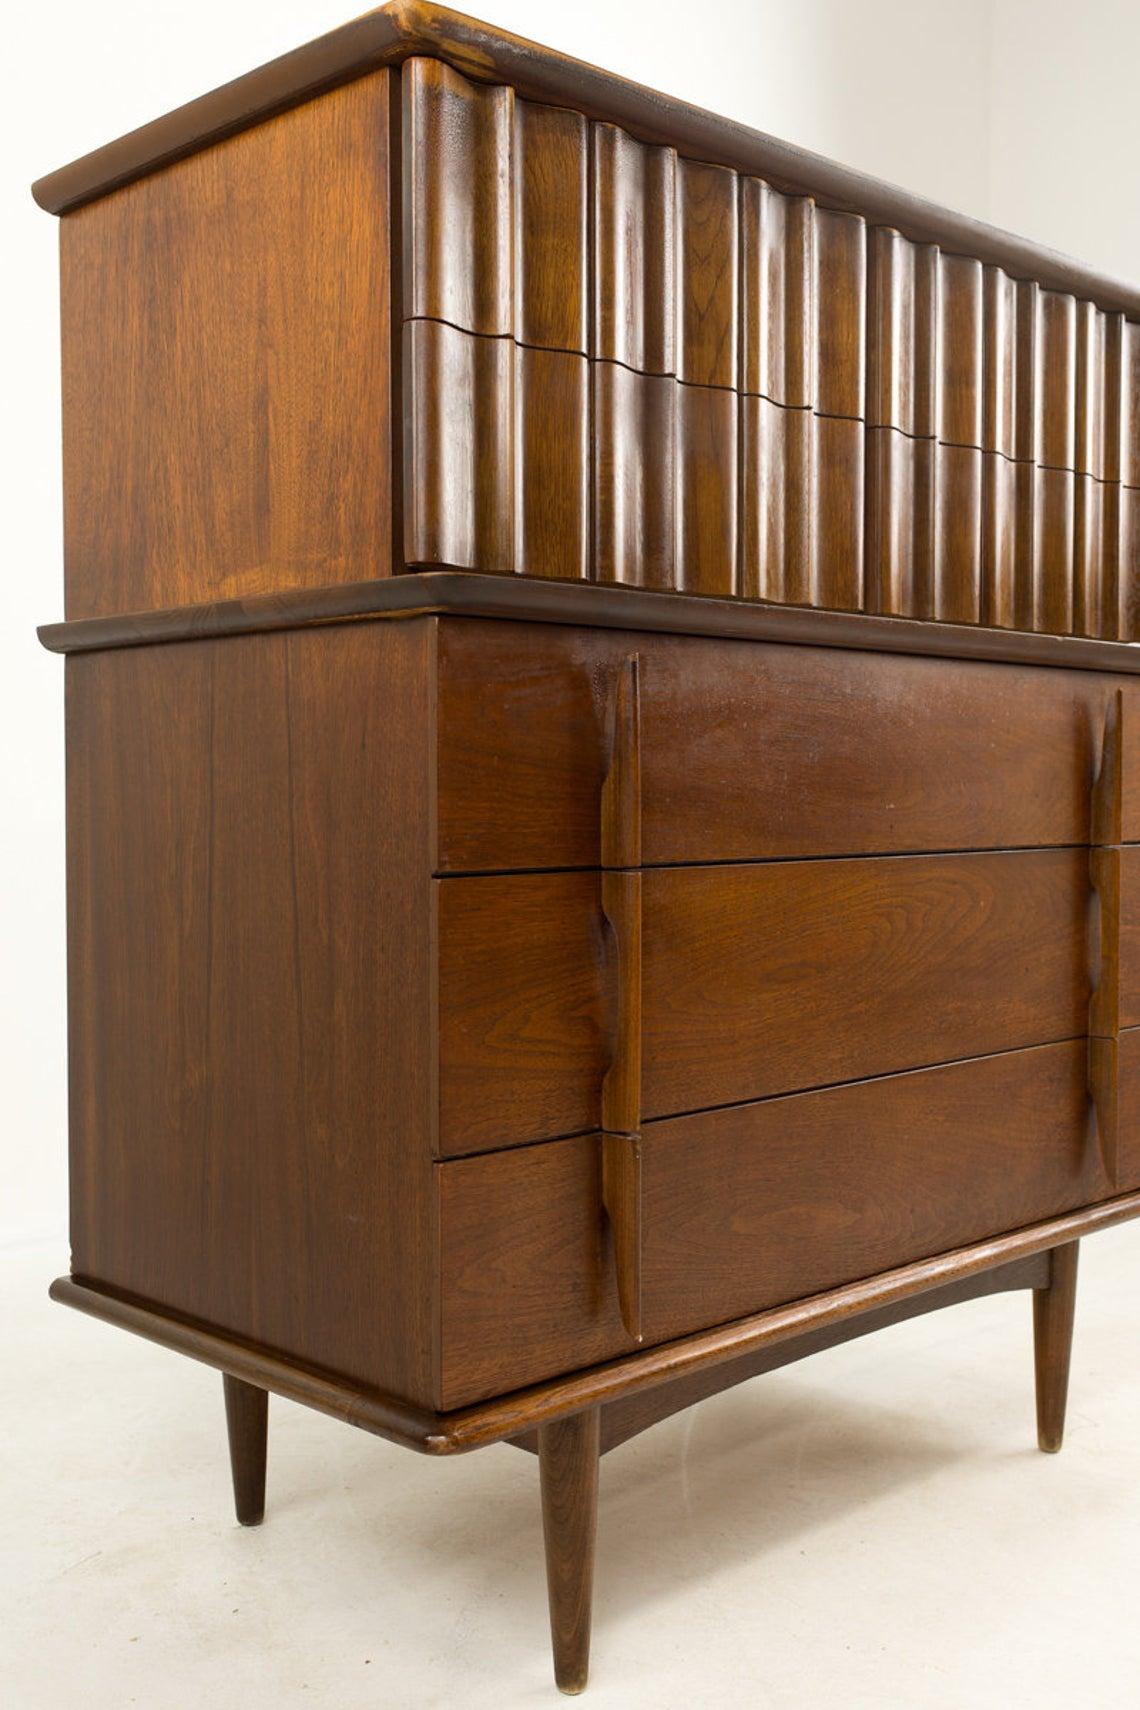 United Furniture Mid Century Walnut 5-drawer Highboy Dresser

Measures: Width 40 inches
Depth 20 inches
Height 45 inches

This price includes getting this piece in what we call restored vintage condition. That means the piece is permanently fixed